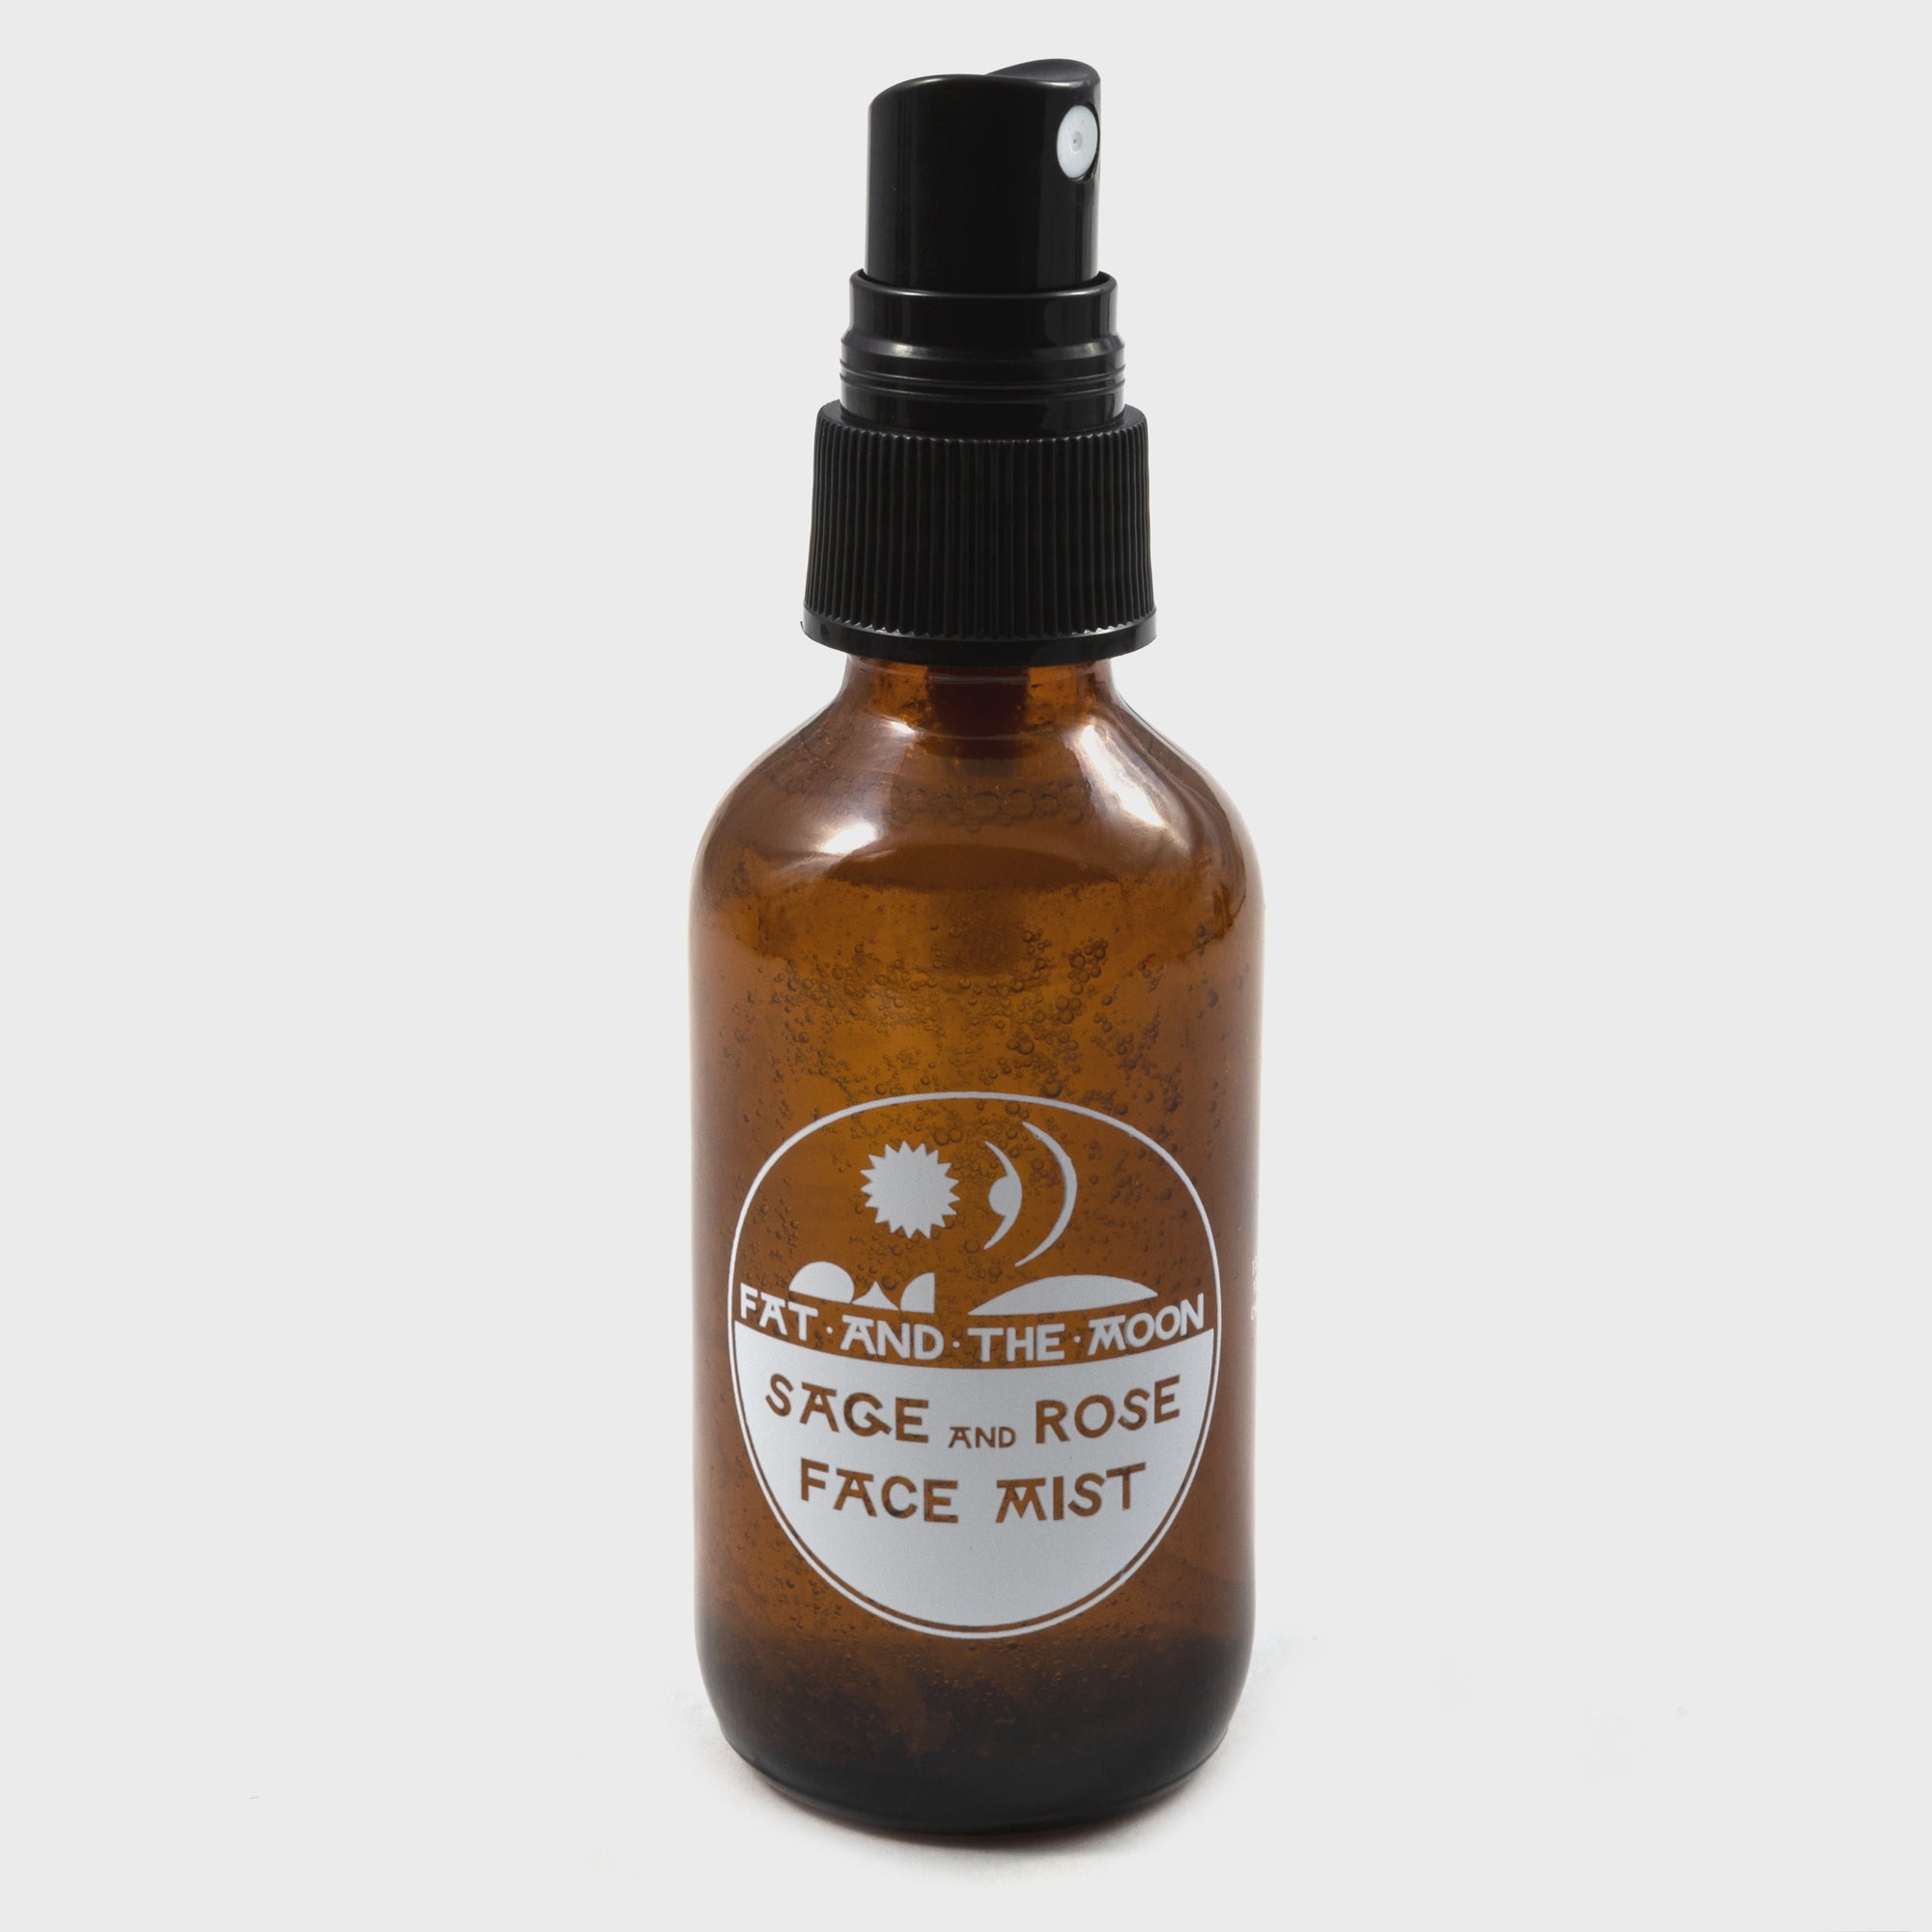 Sage and Rose Face Mist by Fat + the Moon